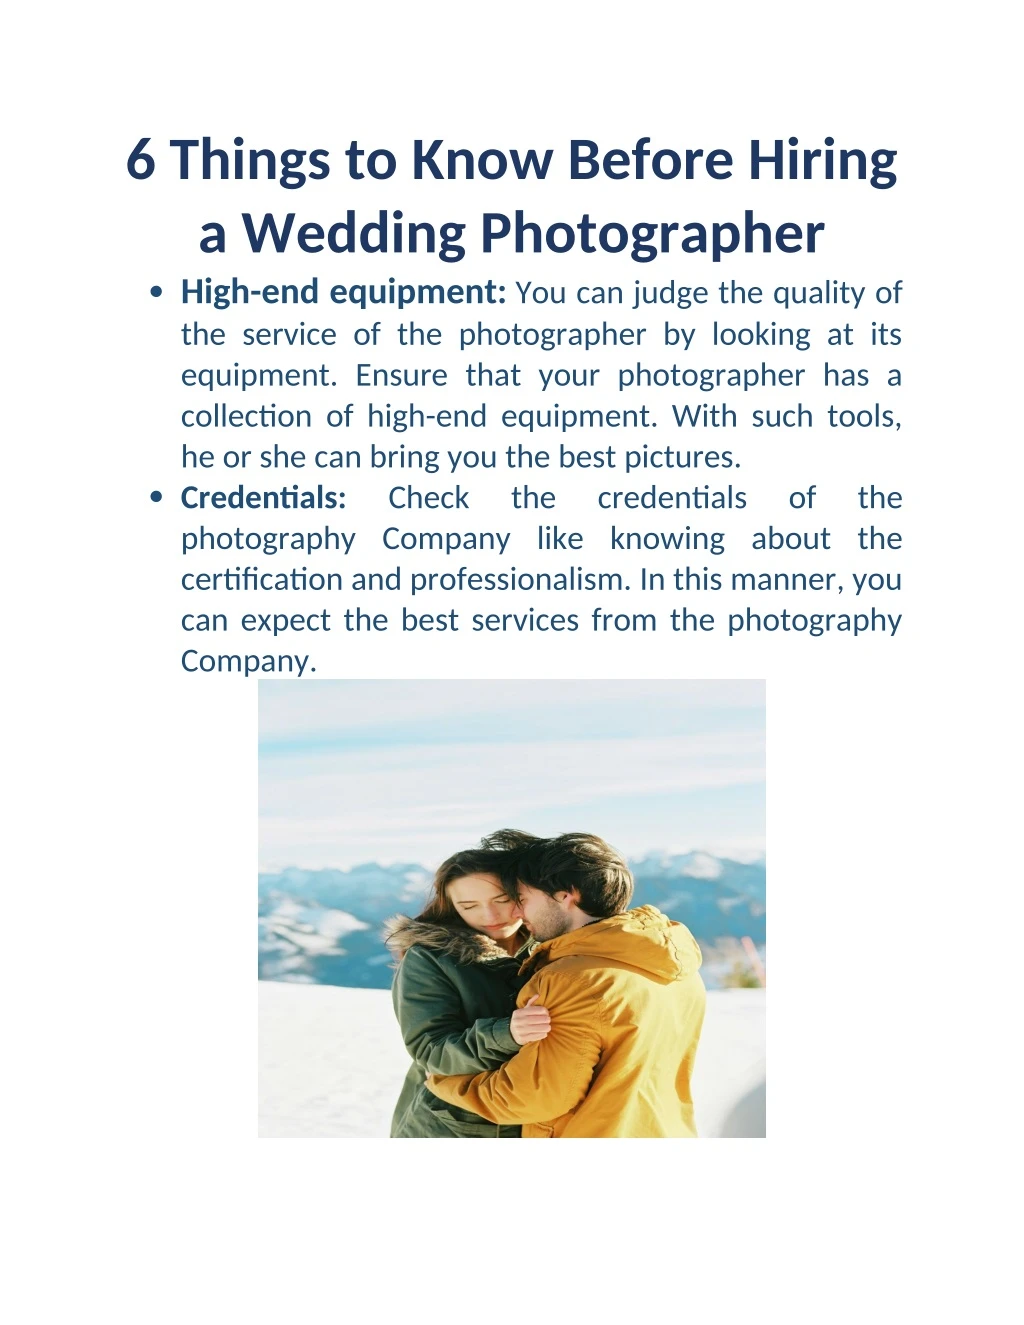 6 things to know before hiring a wedding